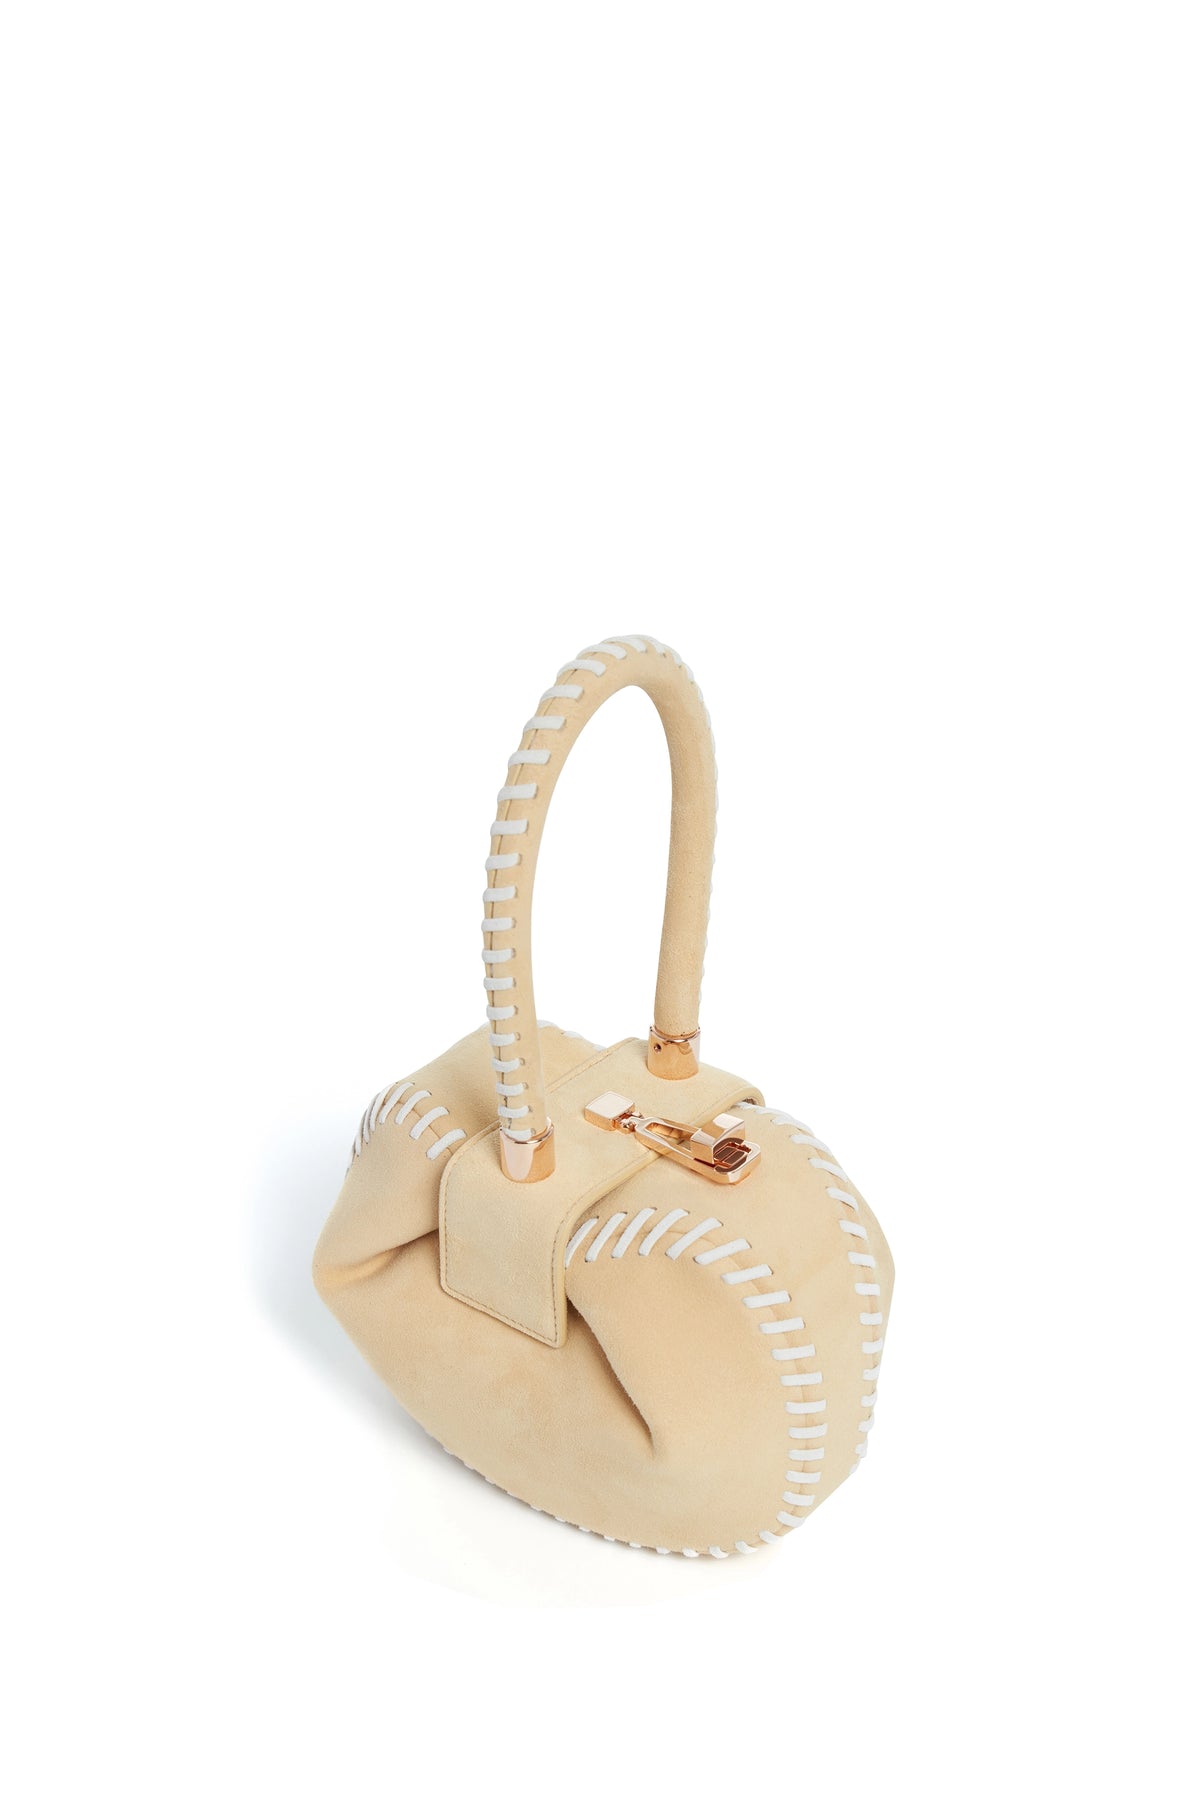 Whipstitch Demi Bag in Nude Suede